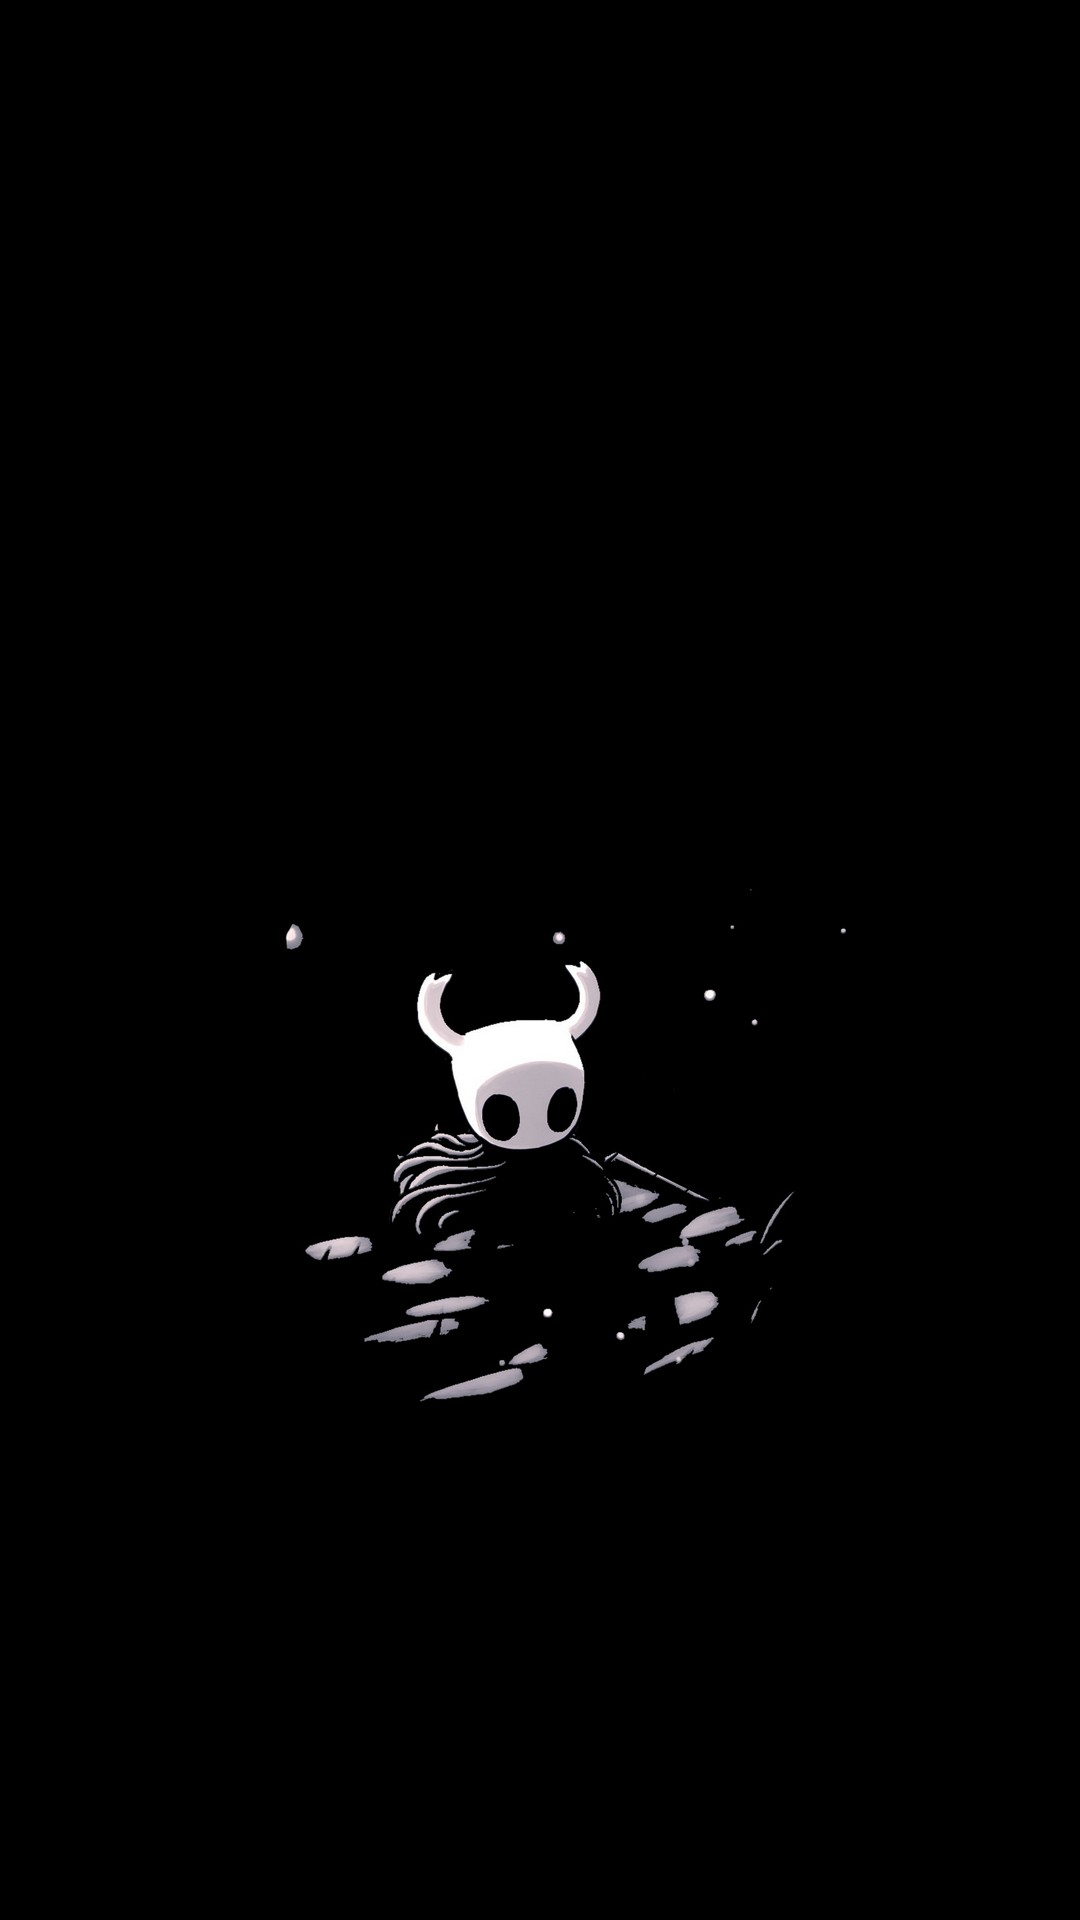 Hollow Knight iPhone Backgrounds With high-resolution 1080X1920 pixel. You can set as wallpaper for Apple iPhone X, XS Max, XR, 8, 7, 6, SE, iPad. Enjoy and share your favorite HD wallpapers and background images